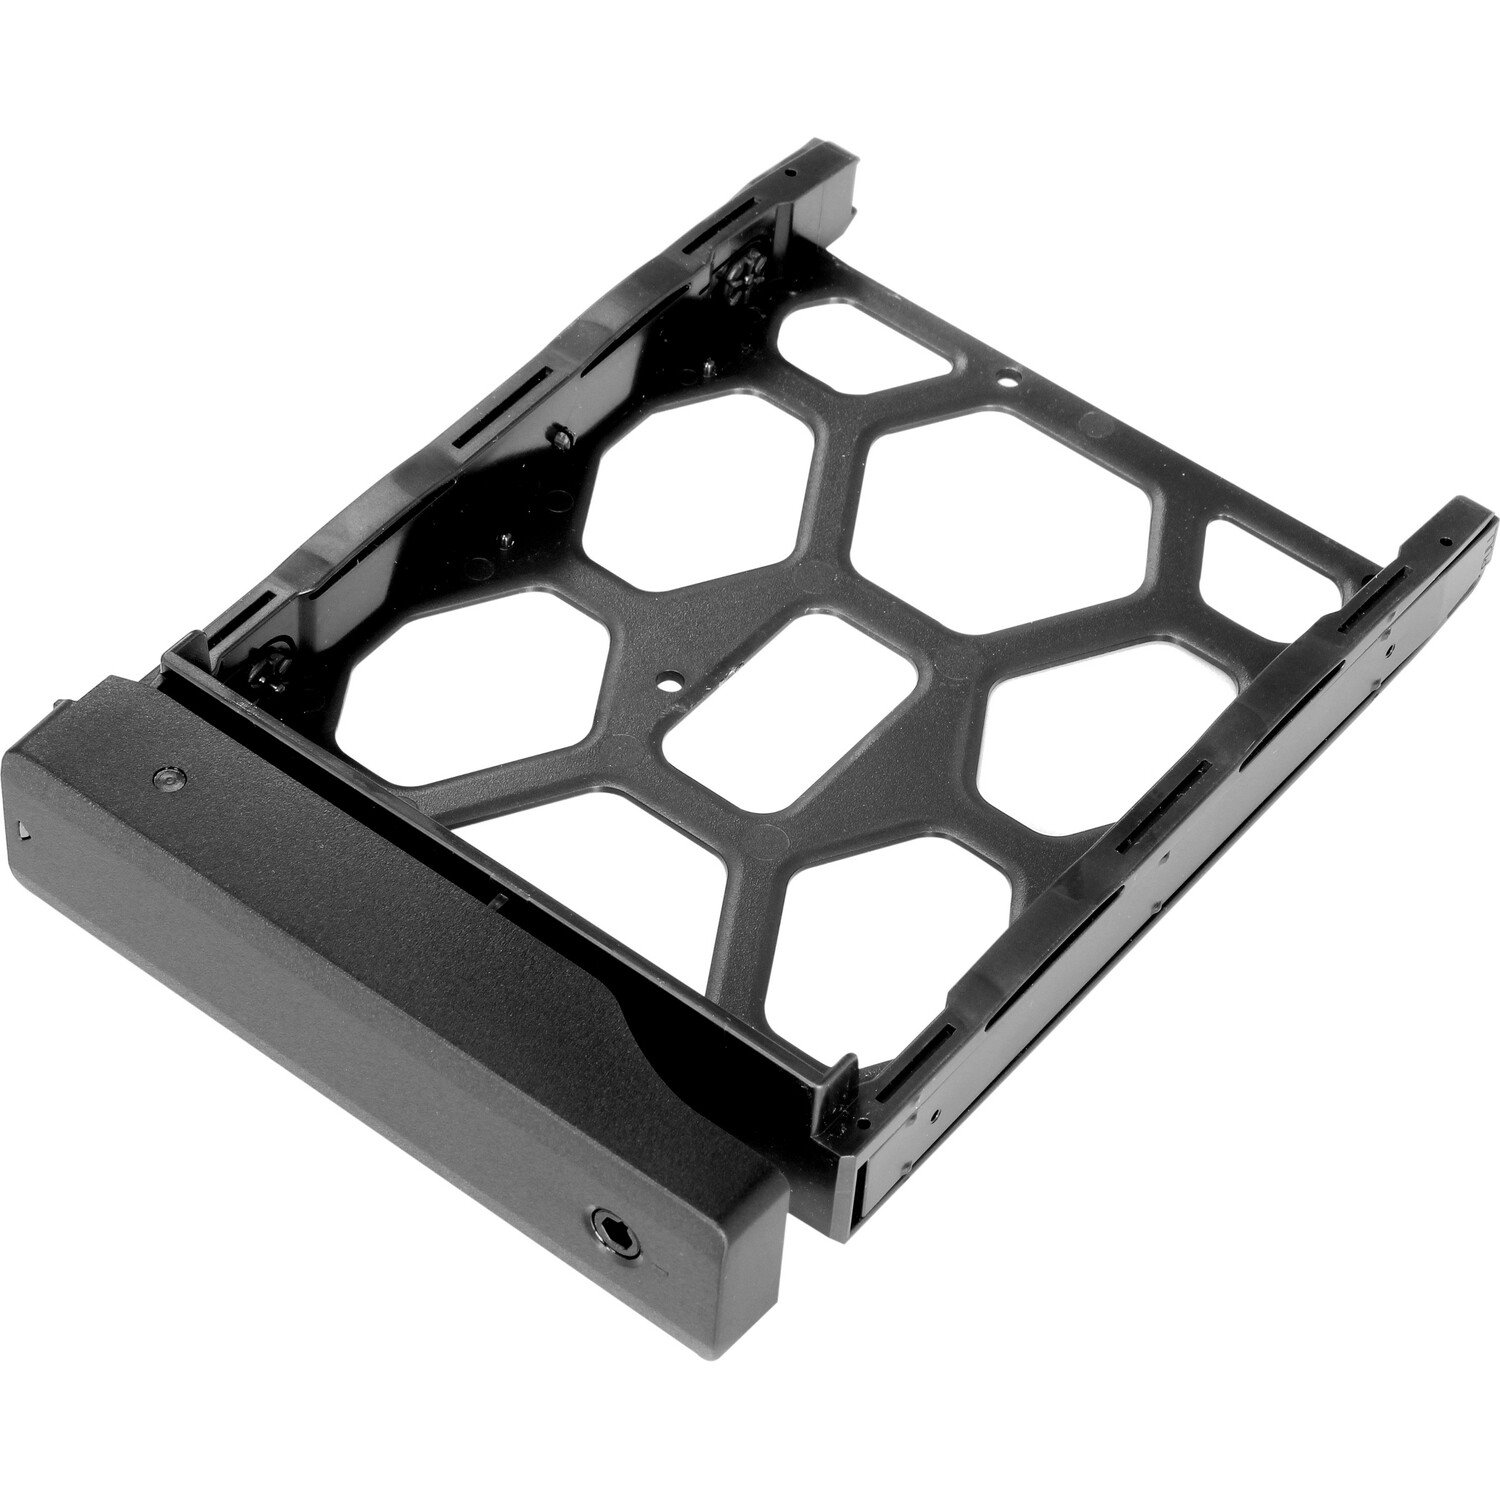 Synology Disk Tray (Type D6) Drive Bay Adapter Internal